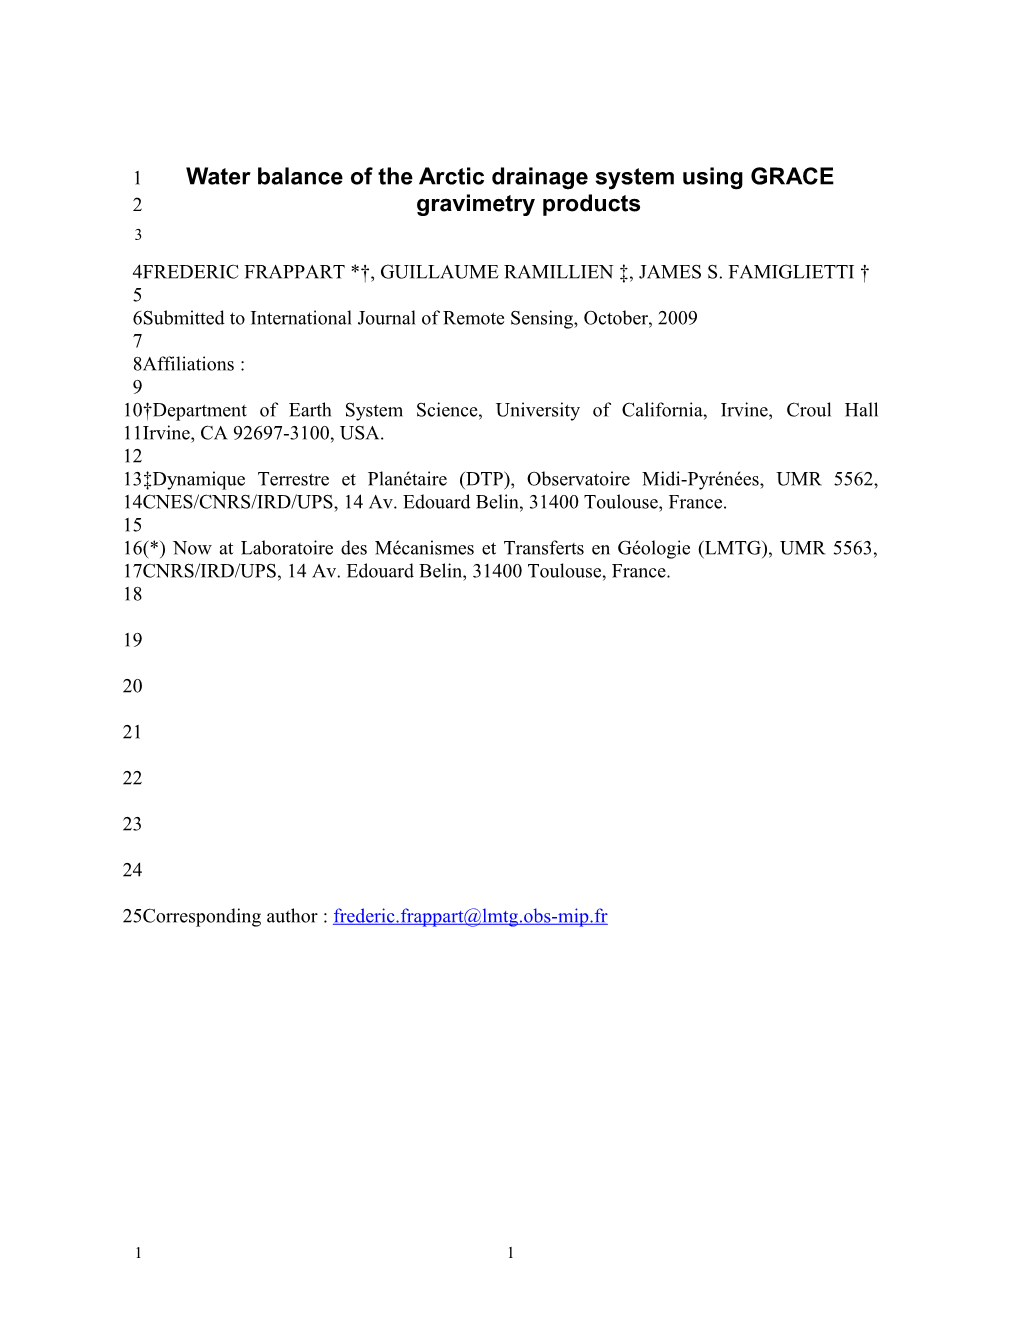 Evolution of High-Latitude Snow Mass Derived from the GRACE Gravimetry Mission (2002-2004)